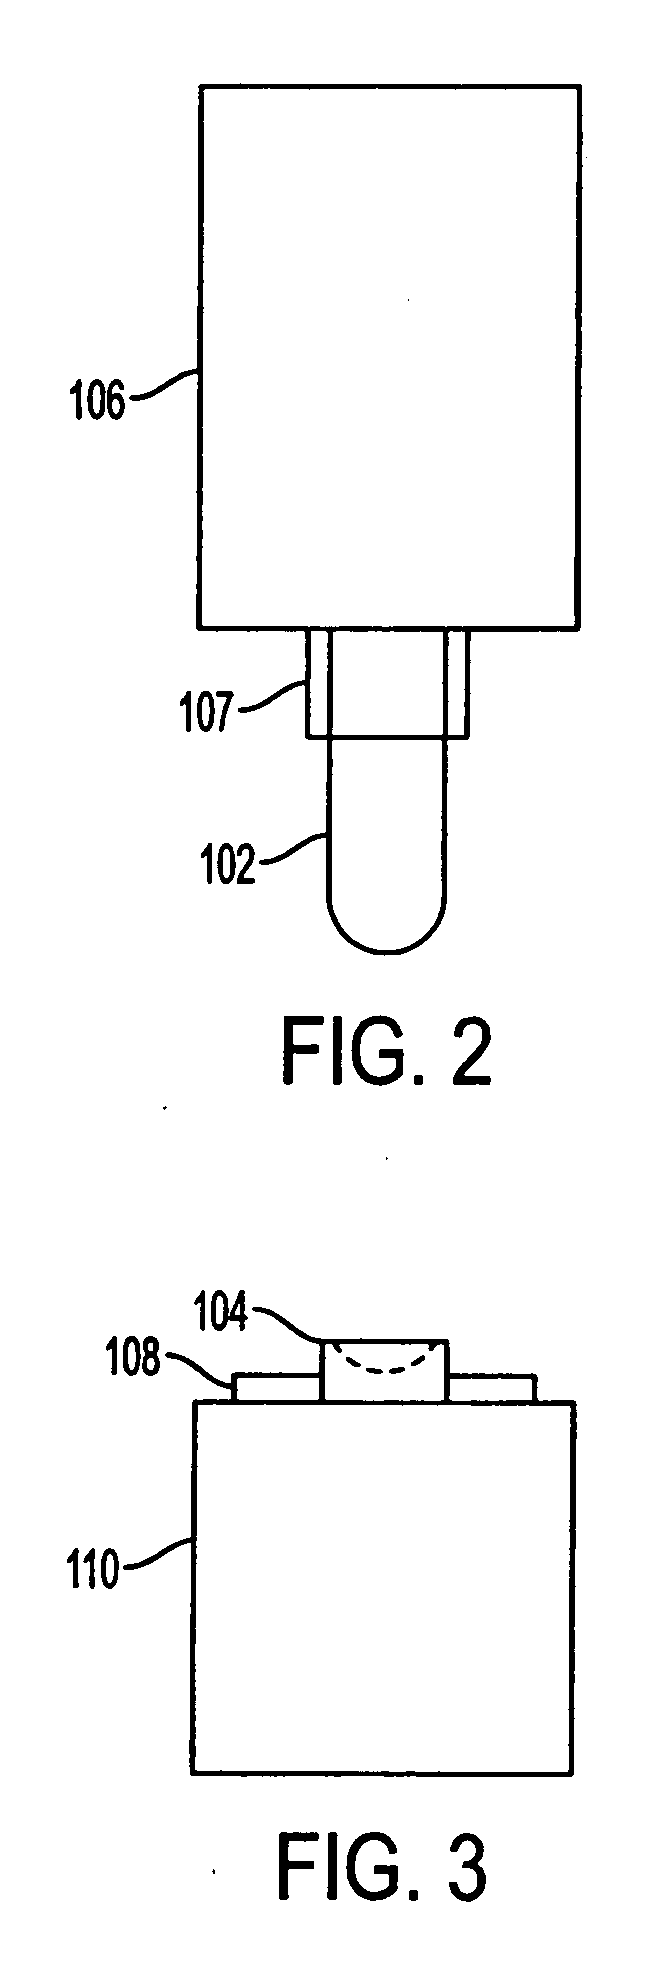 Apparatus for pressure based blocking process for lens manufacturing